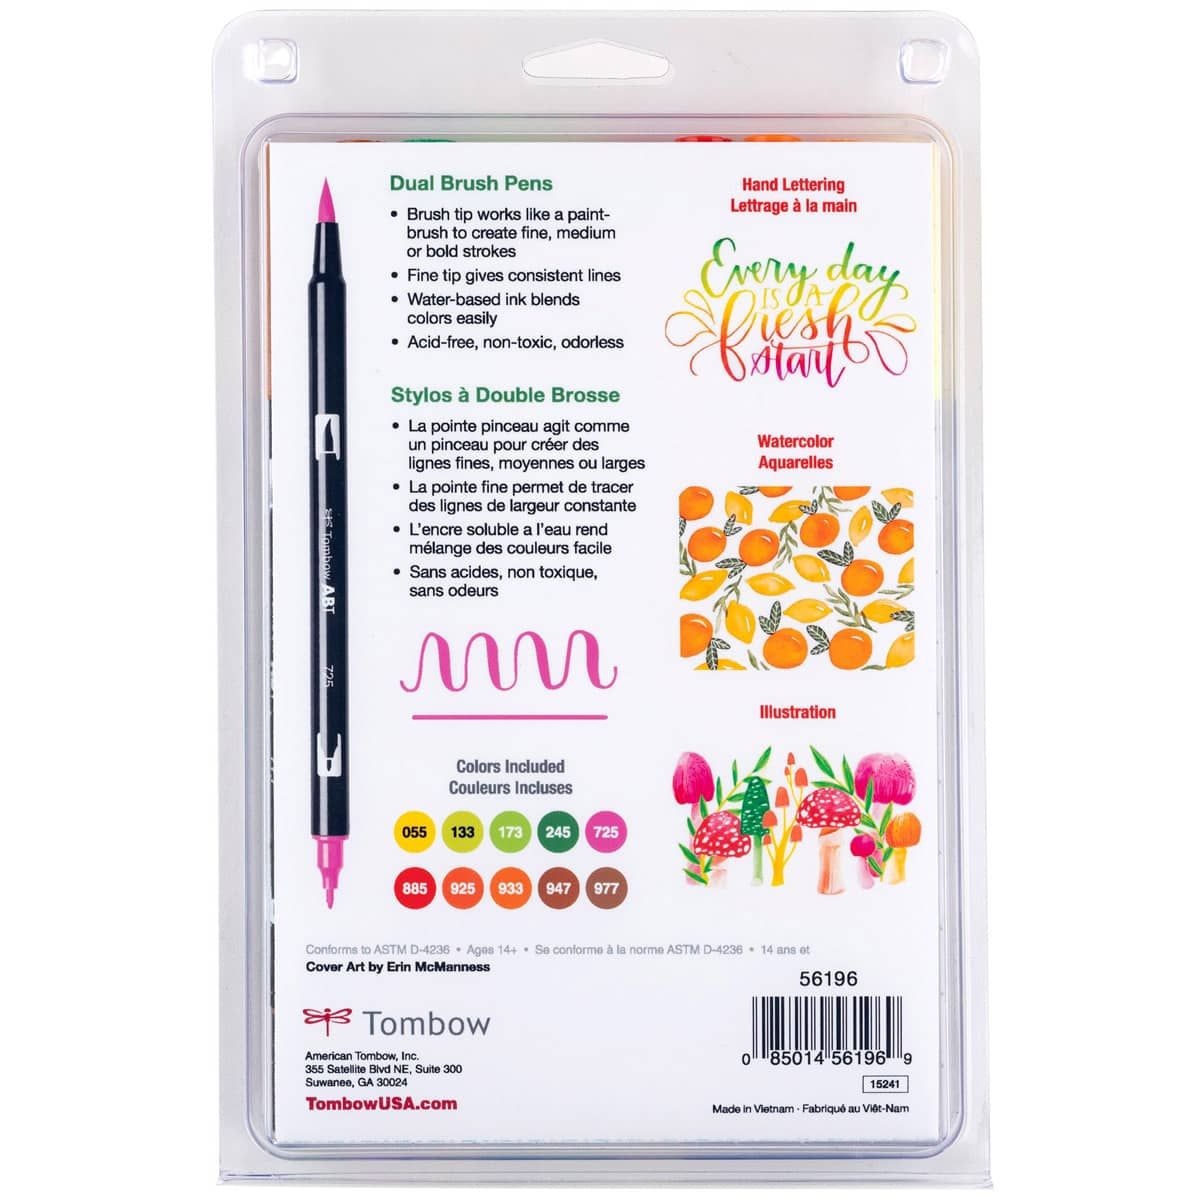 Tombow USA Marker Trifold Case for Tombow Pens Holds 108 Markers